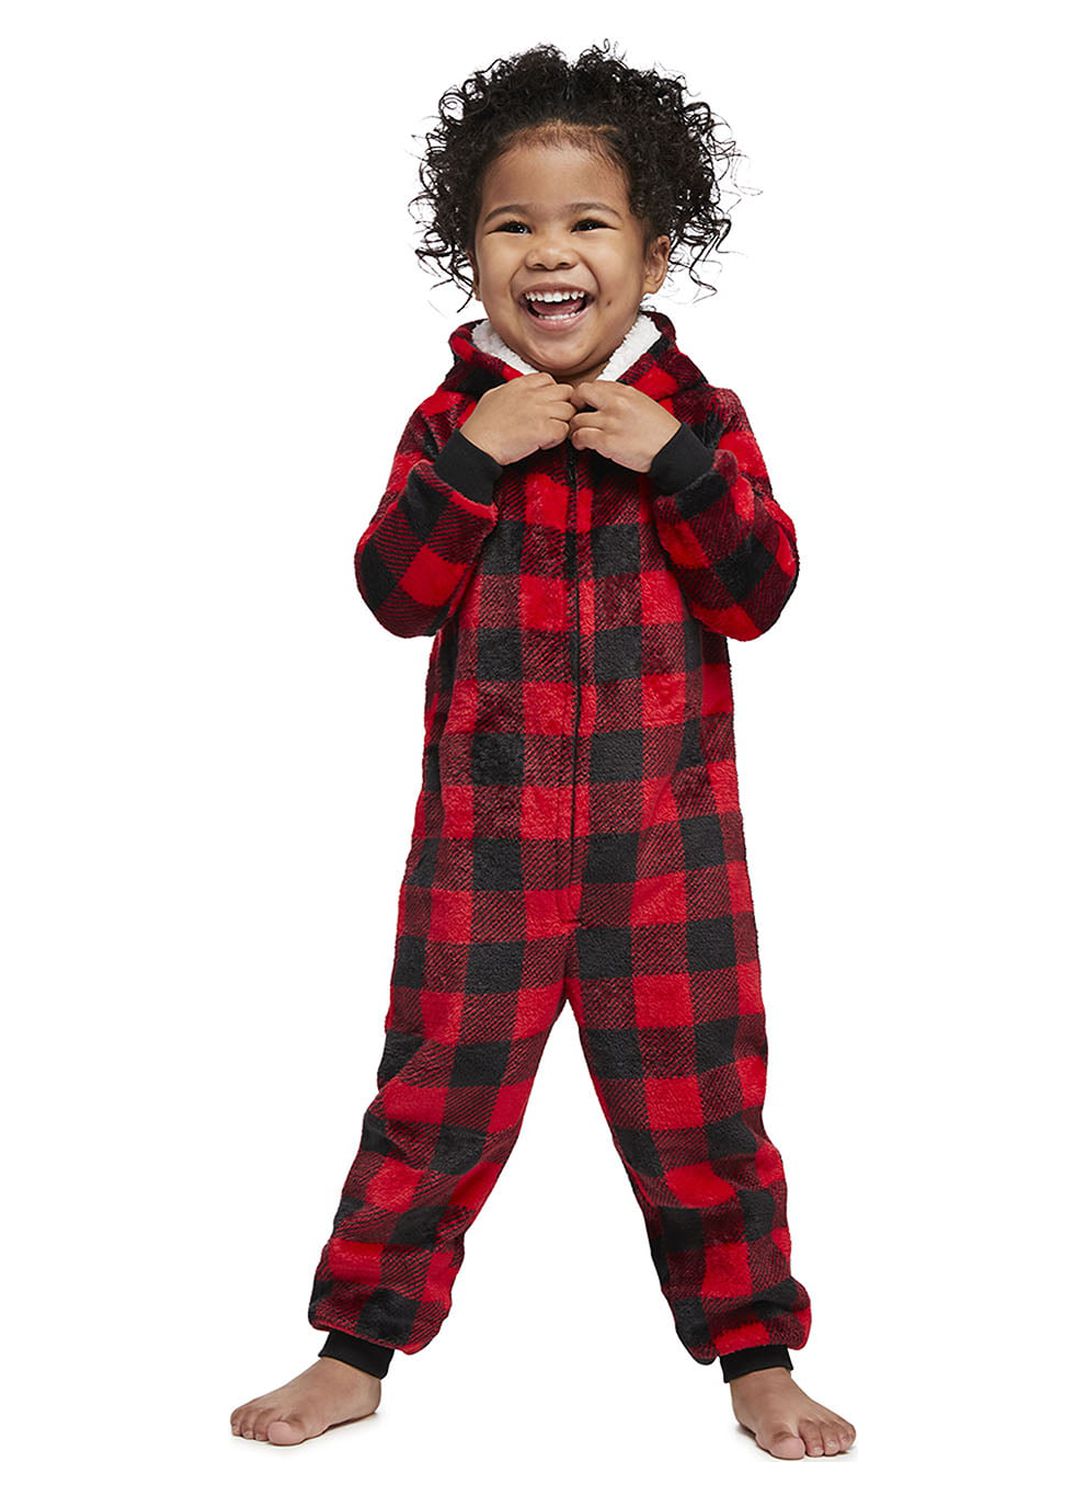 Jolly Jammies Toddler Buffalo Plaid Matching Family Pajamas Union Suit, Sizes 2T-5T - image 3 of 10